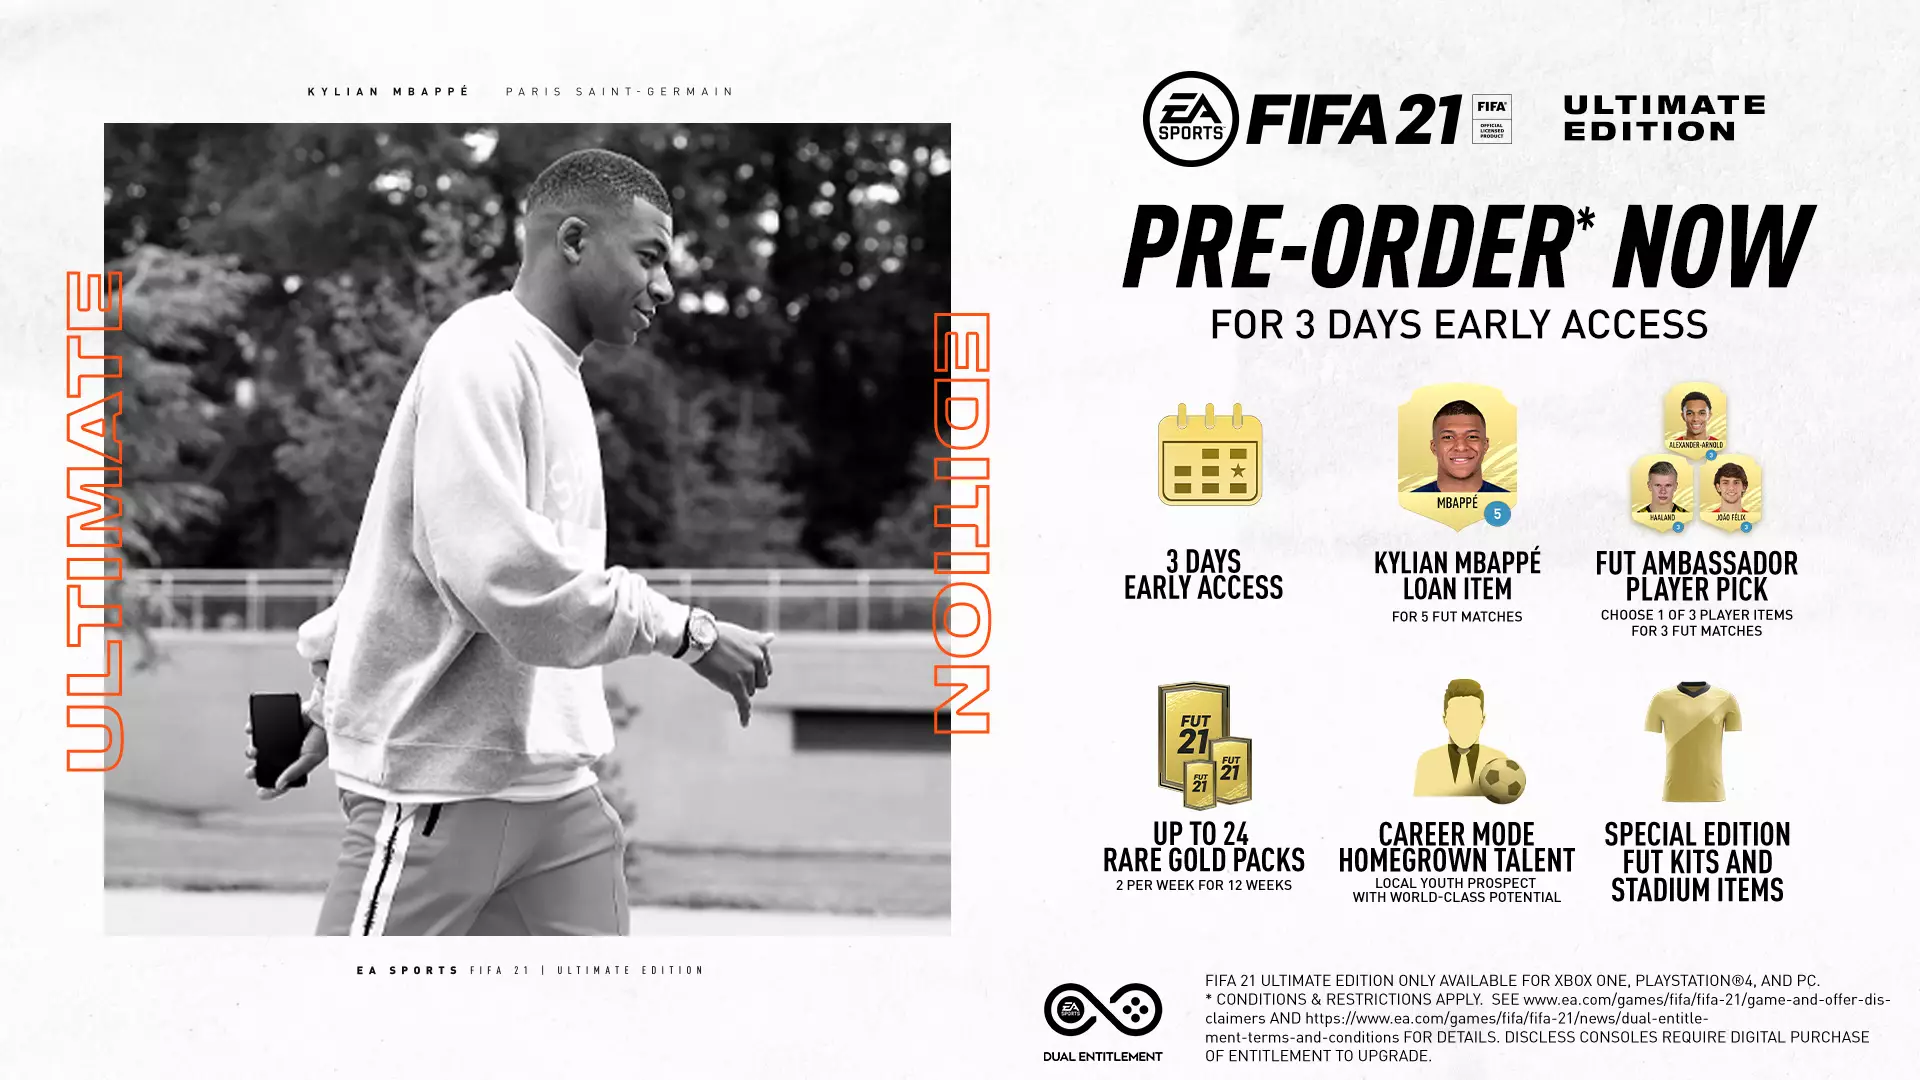 Pre-order bonuses for Ultimate Edition. (Image